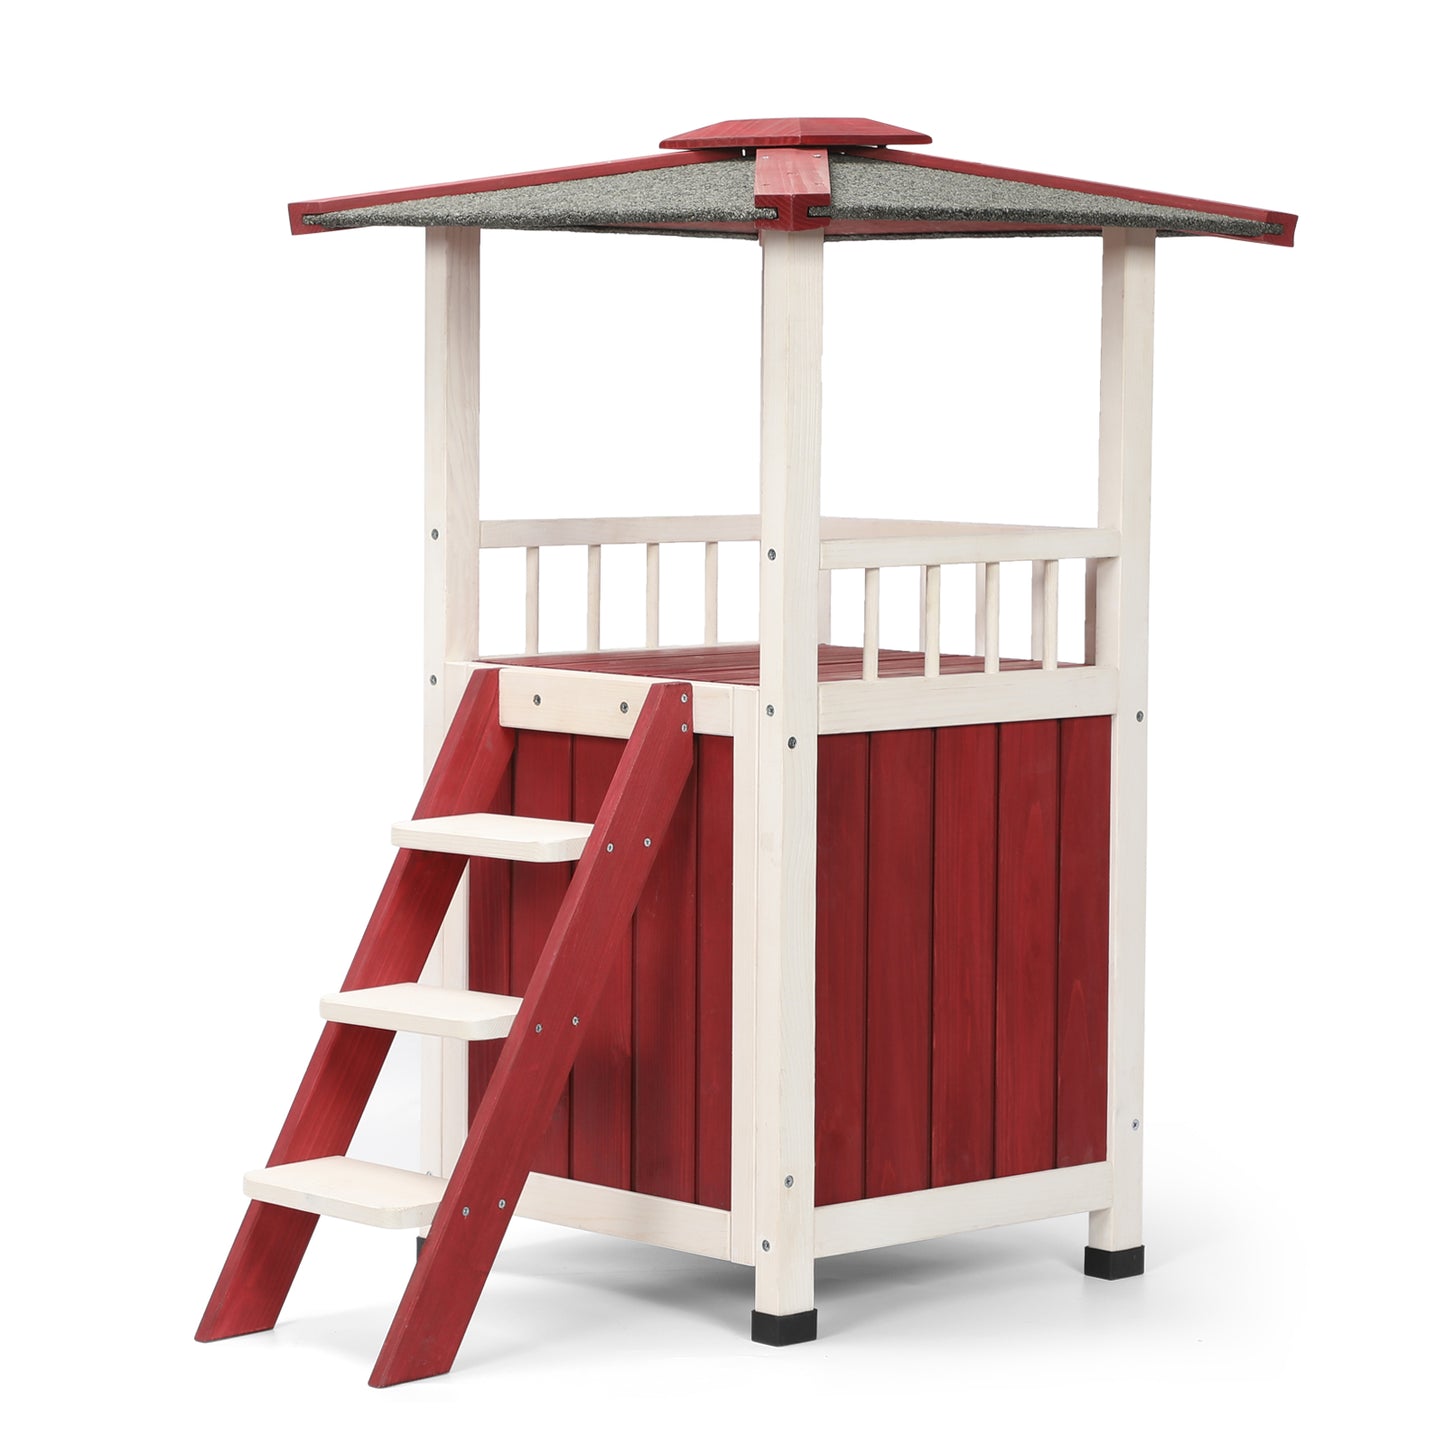 Petsfit-Outside-2-Story-Wood-Cat-Condo-with-Ladder-Waterproof-02